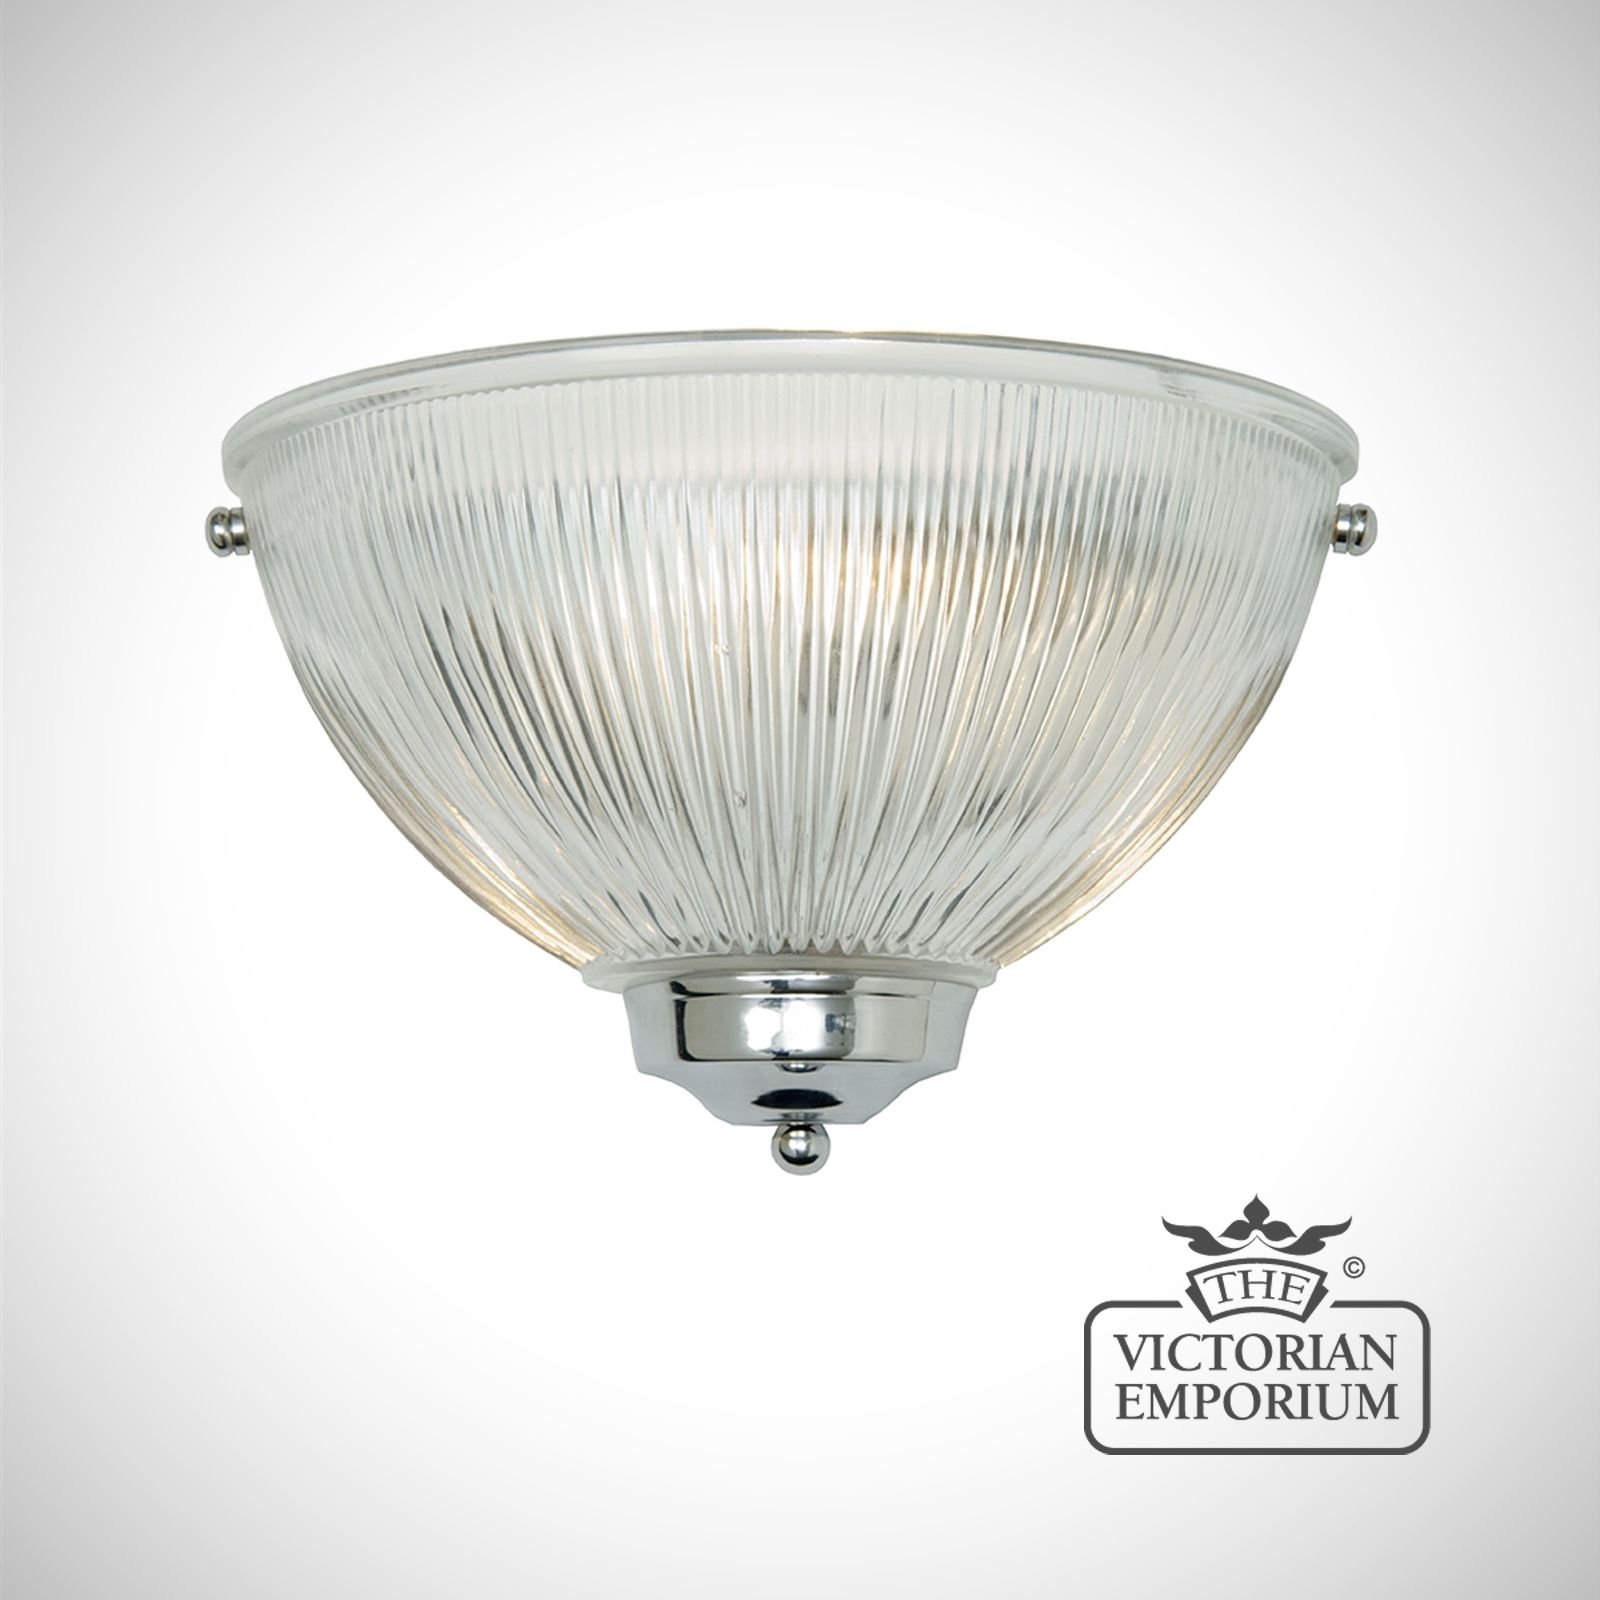 Classic dome wall light with reeded glass